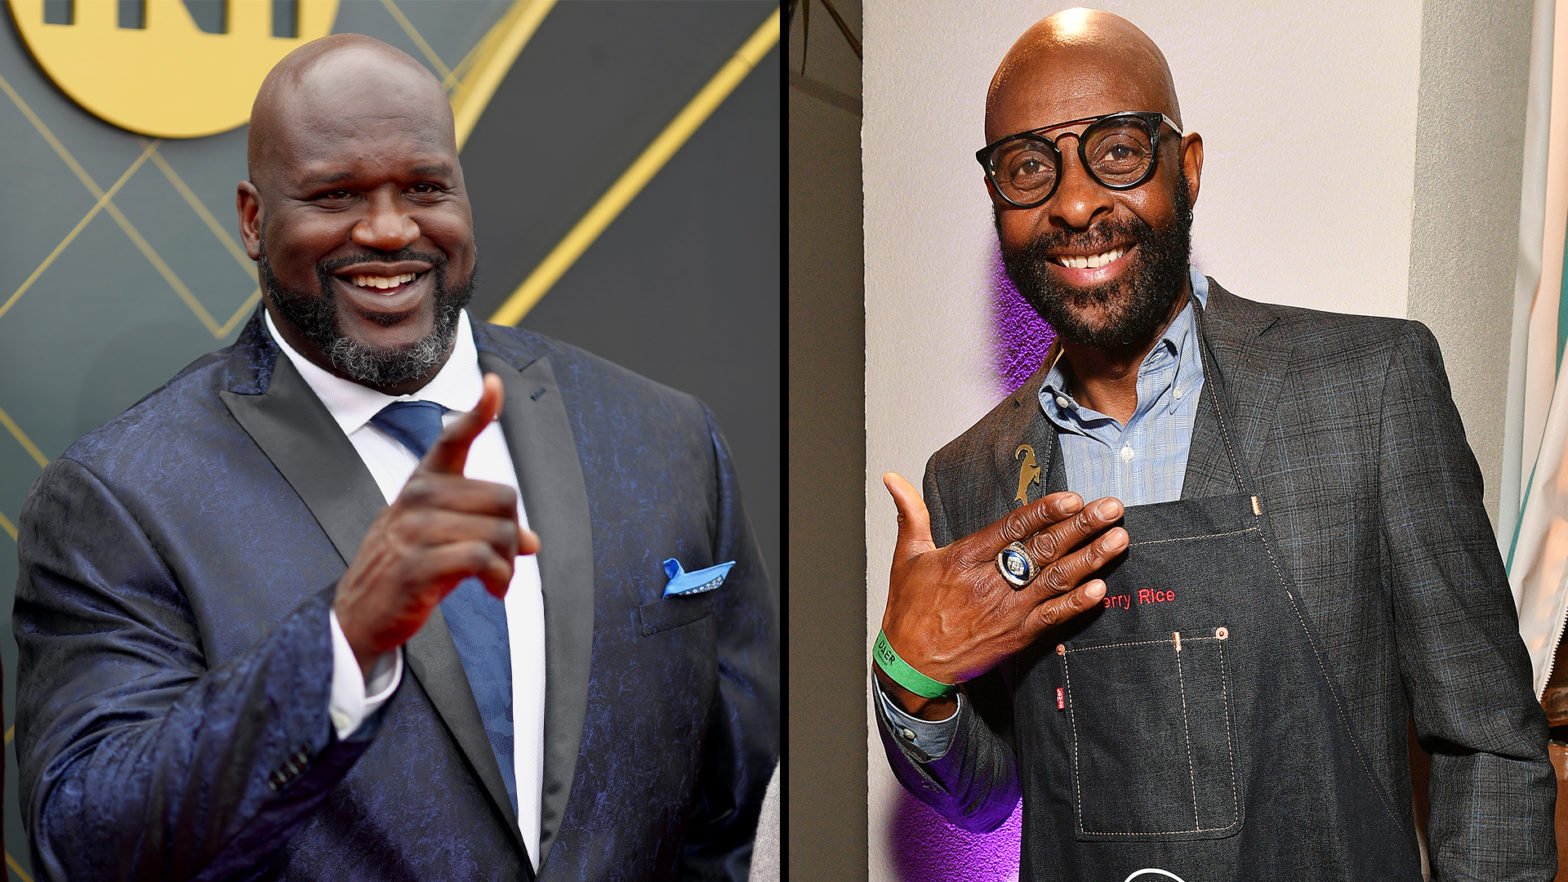 OneOf Teams Up With Sports Illustrated To Launch Exclusive NFTs Featuring Shaquille O'Neal, Jerry Rice, & More